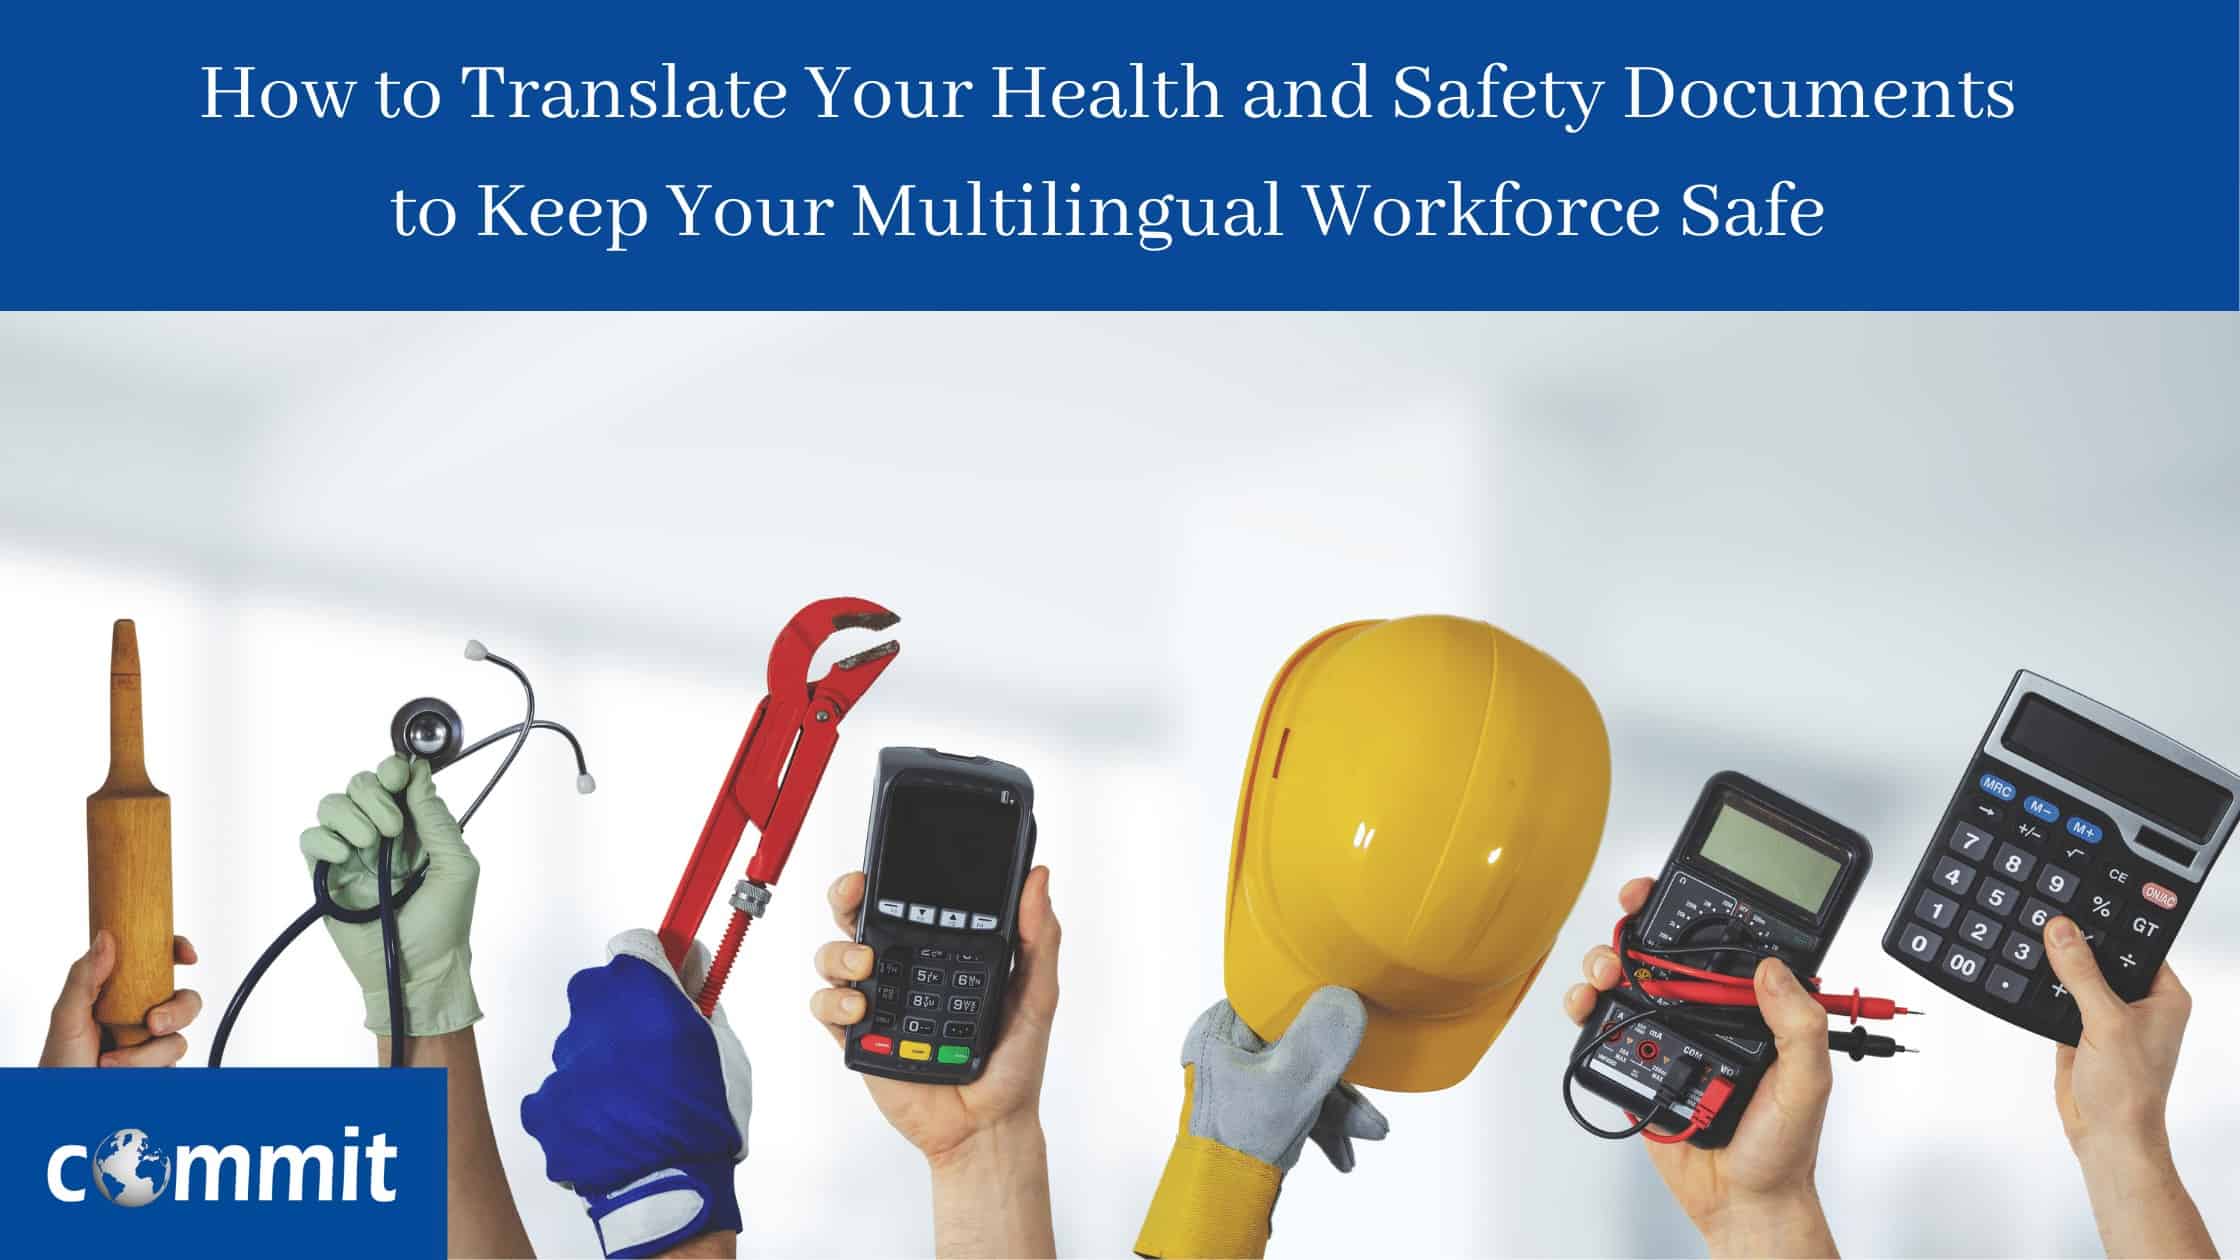 How to Translate Your Health and Safety Documents to Keep Your Multilingual Workforce Safe